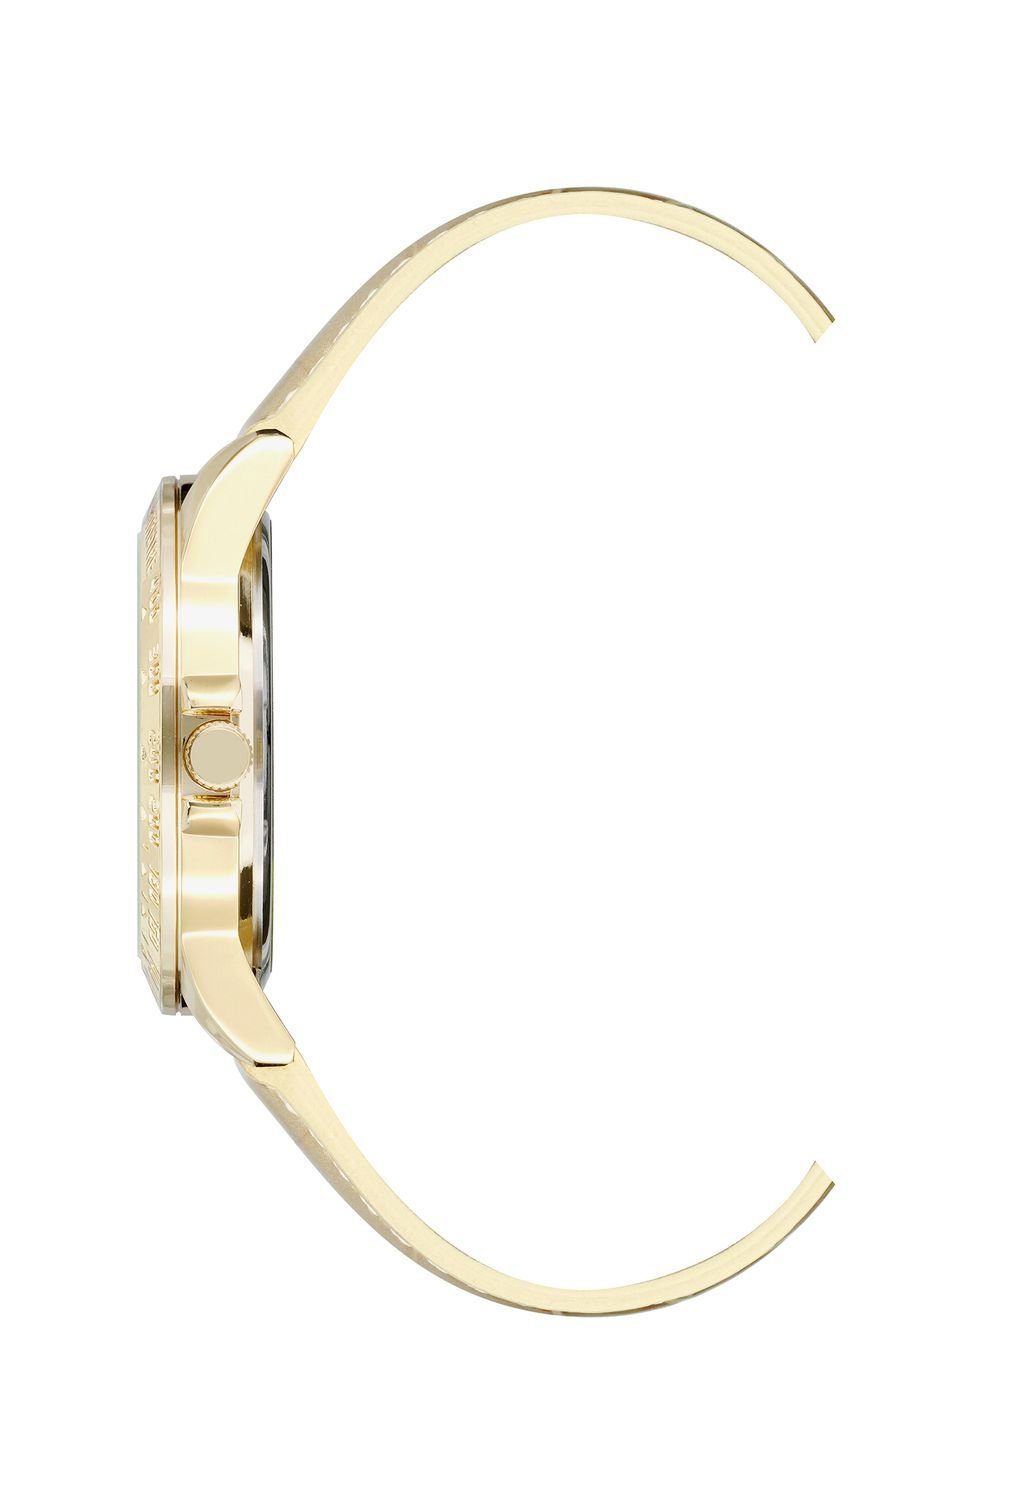 JC/1220GPGD Digitaluhr Couture Juicy